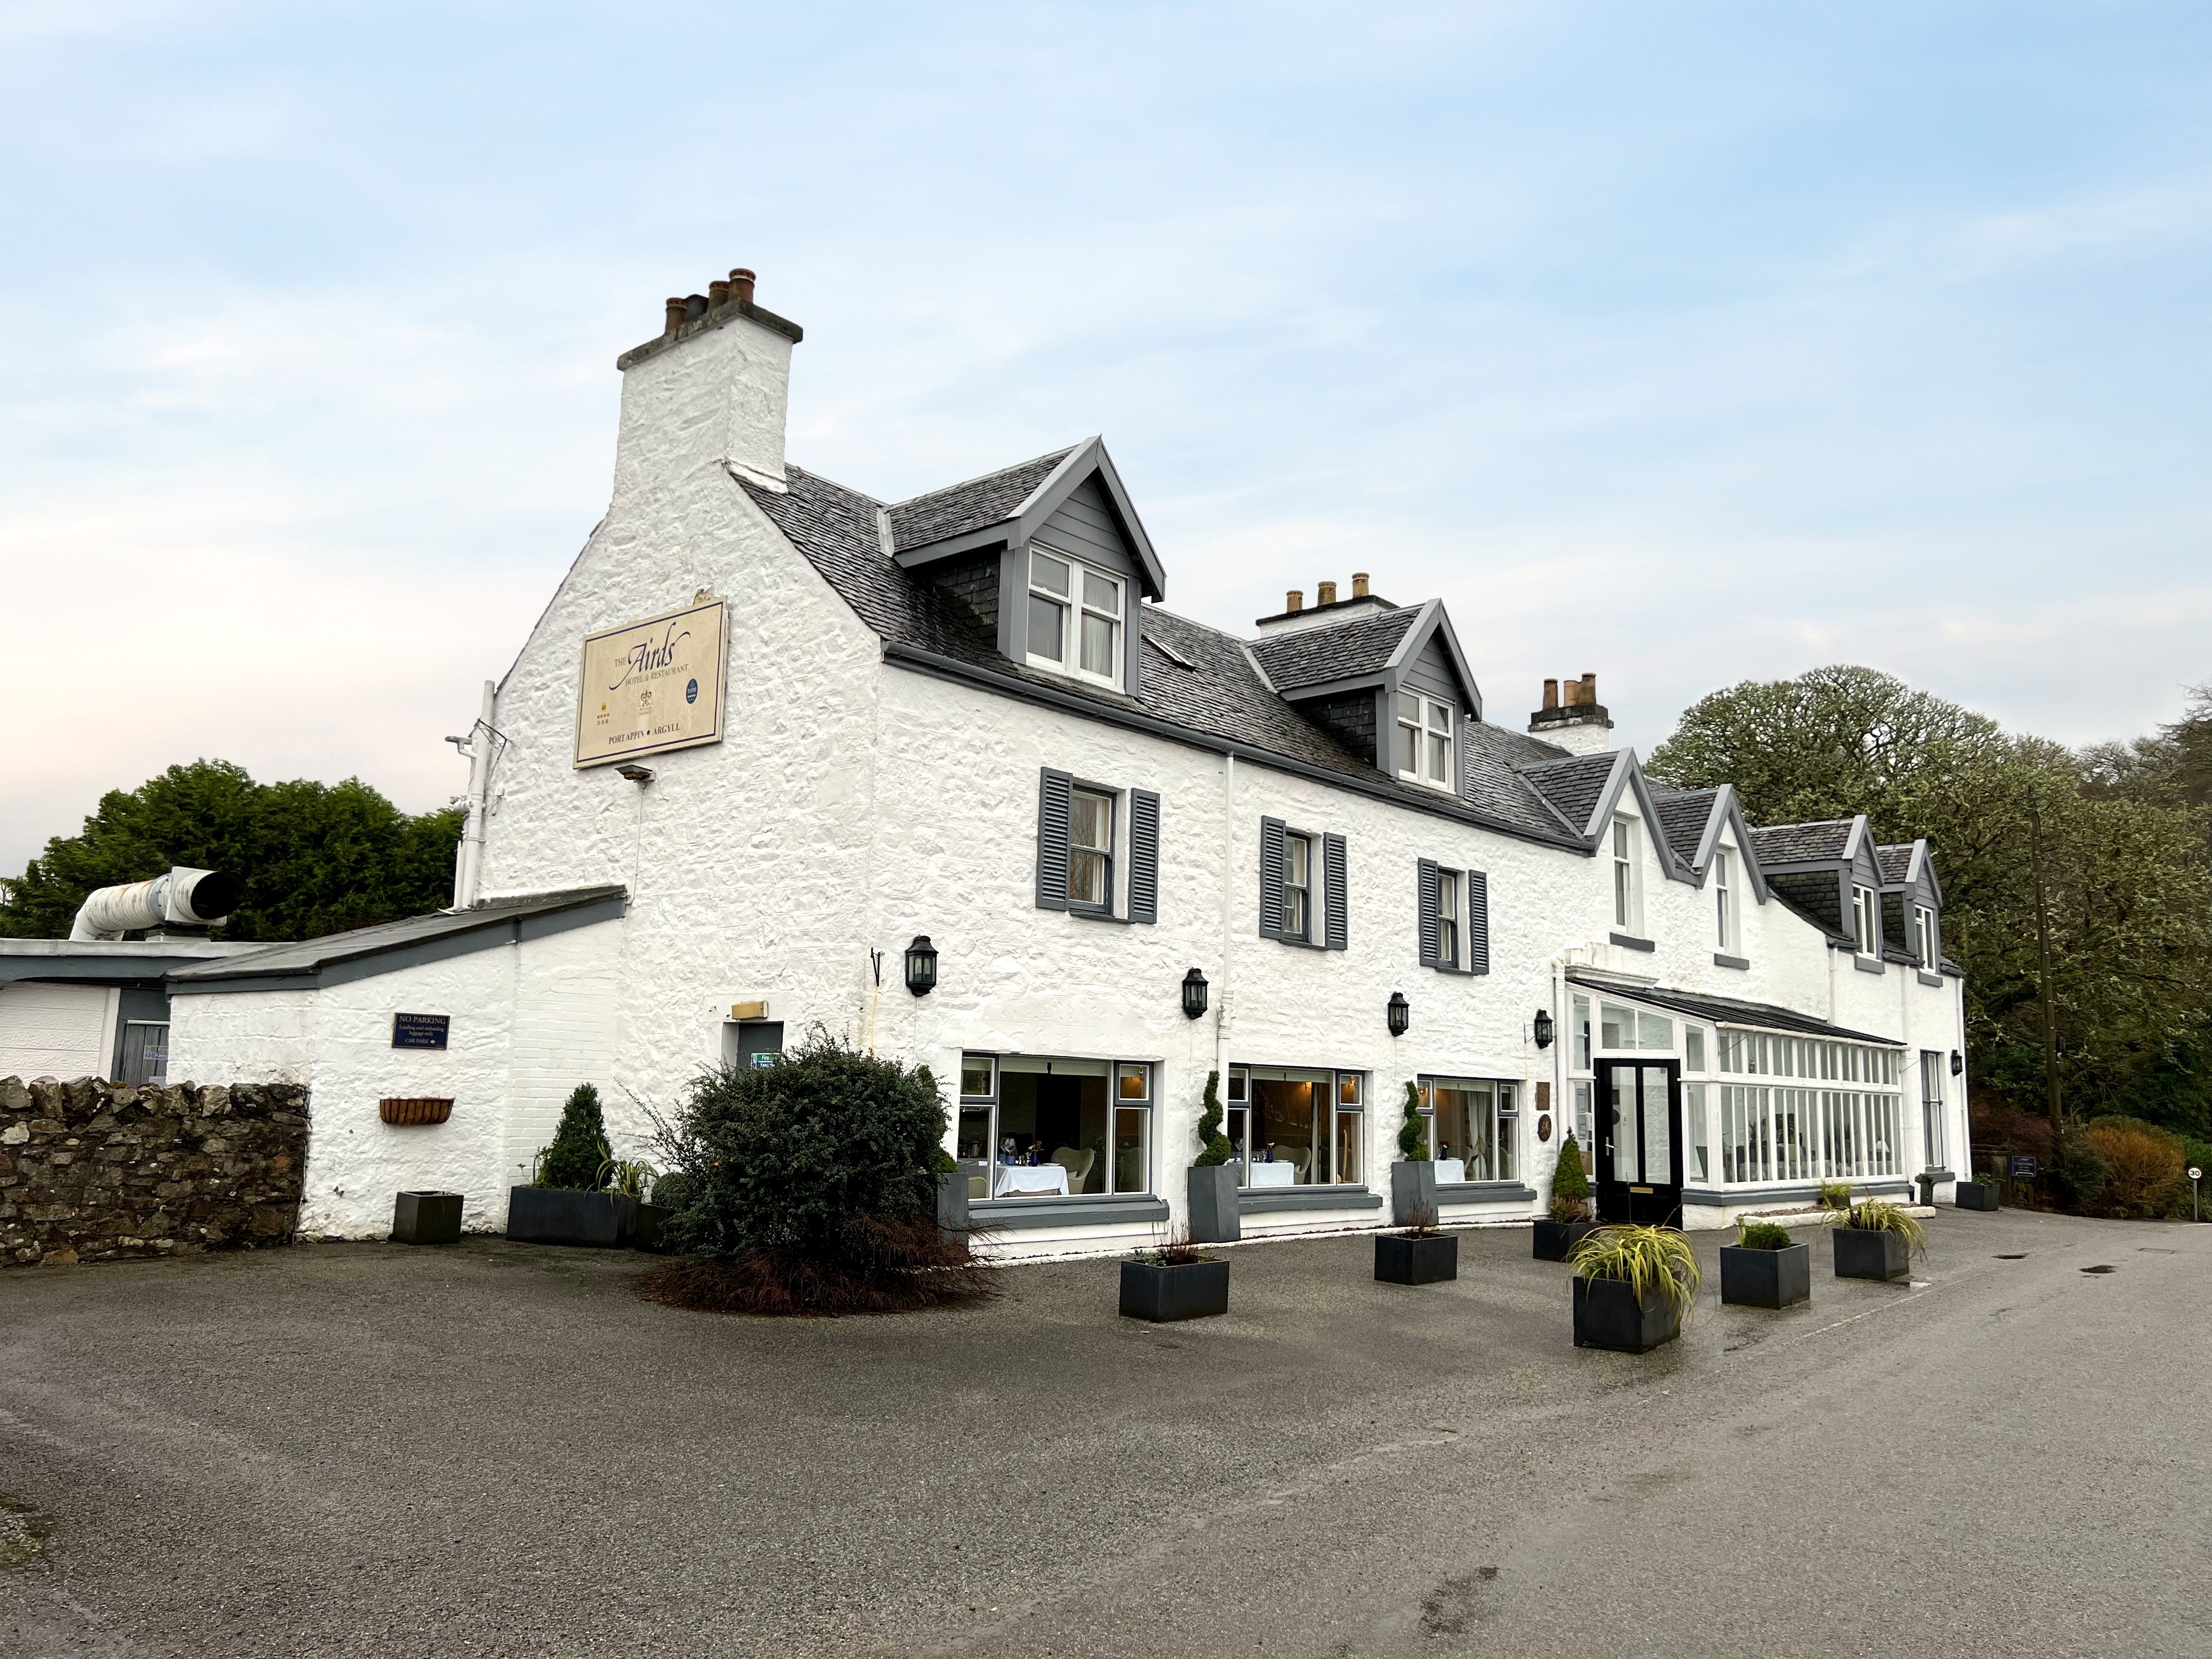 The Airds Hotel in Port Appin, near Oban